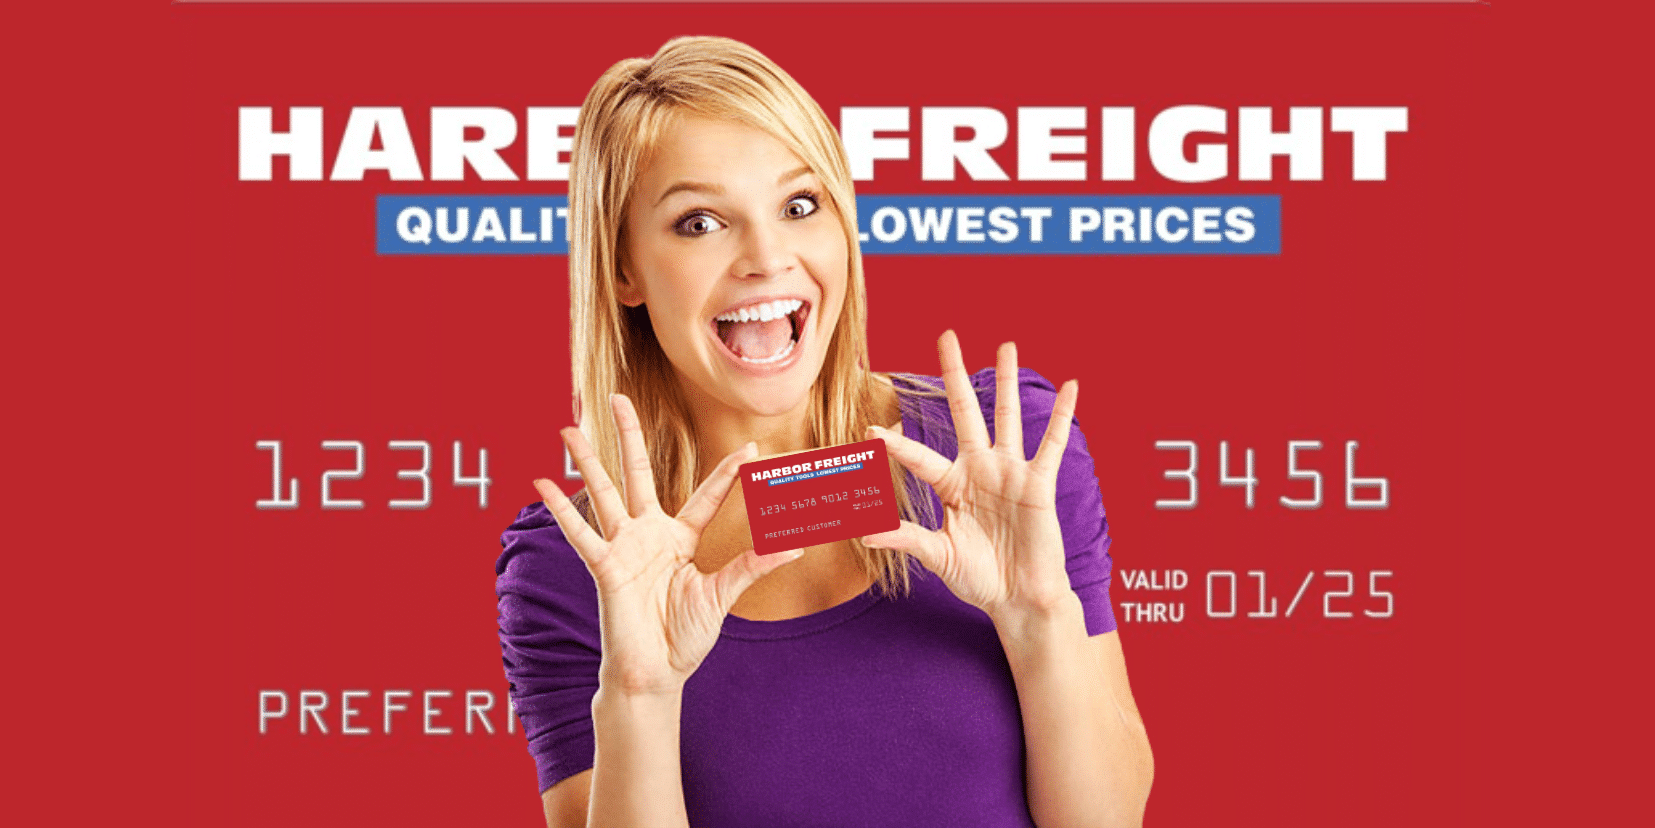 Harbor freight credit card